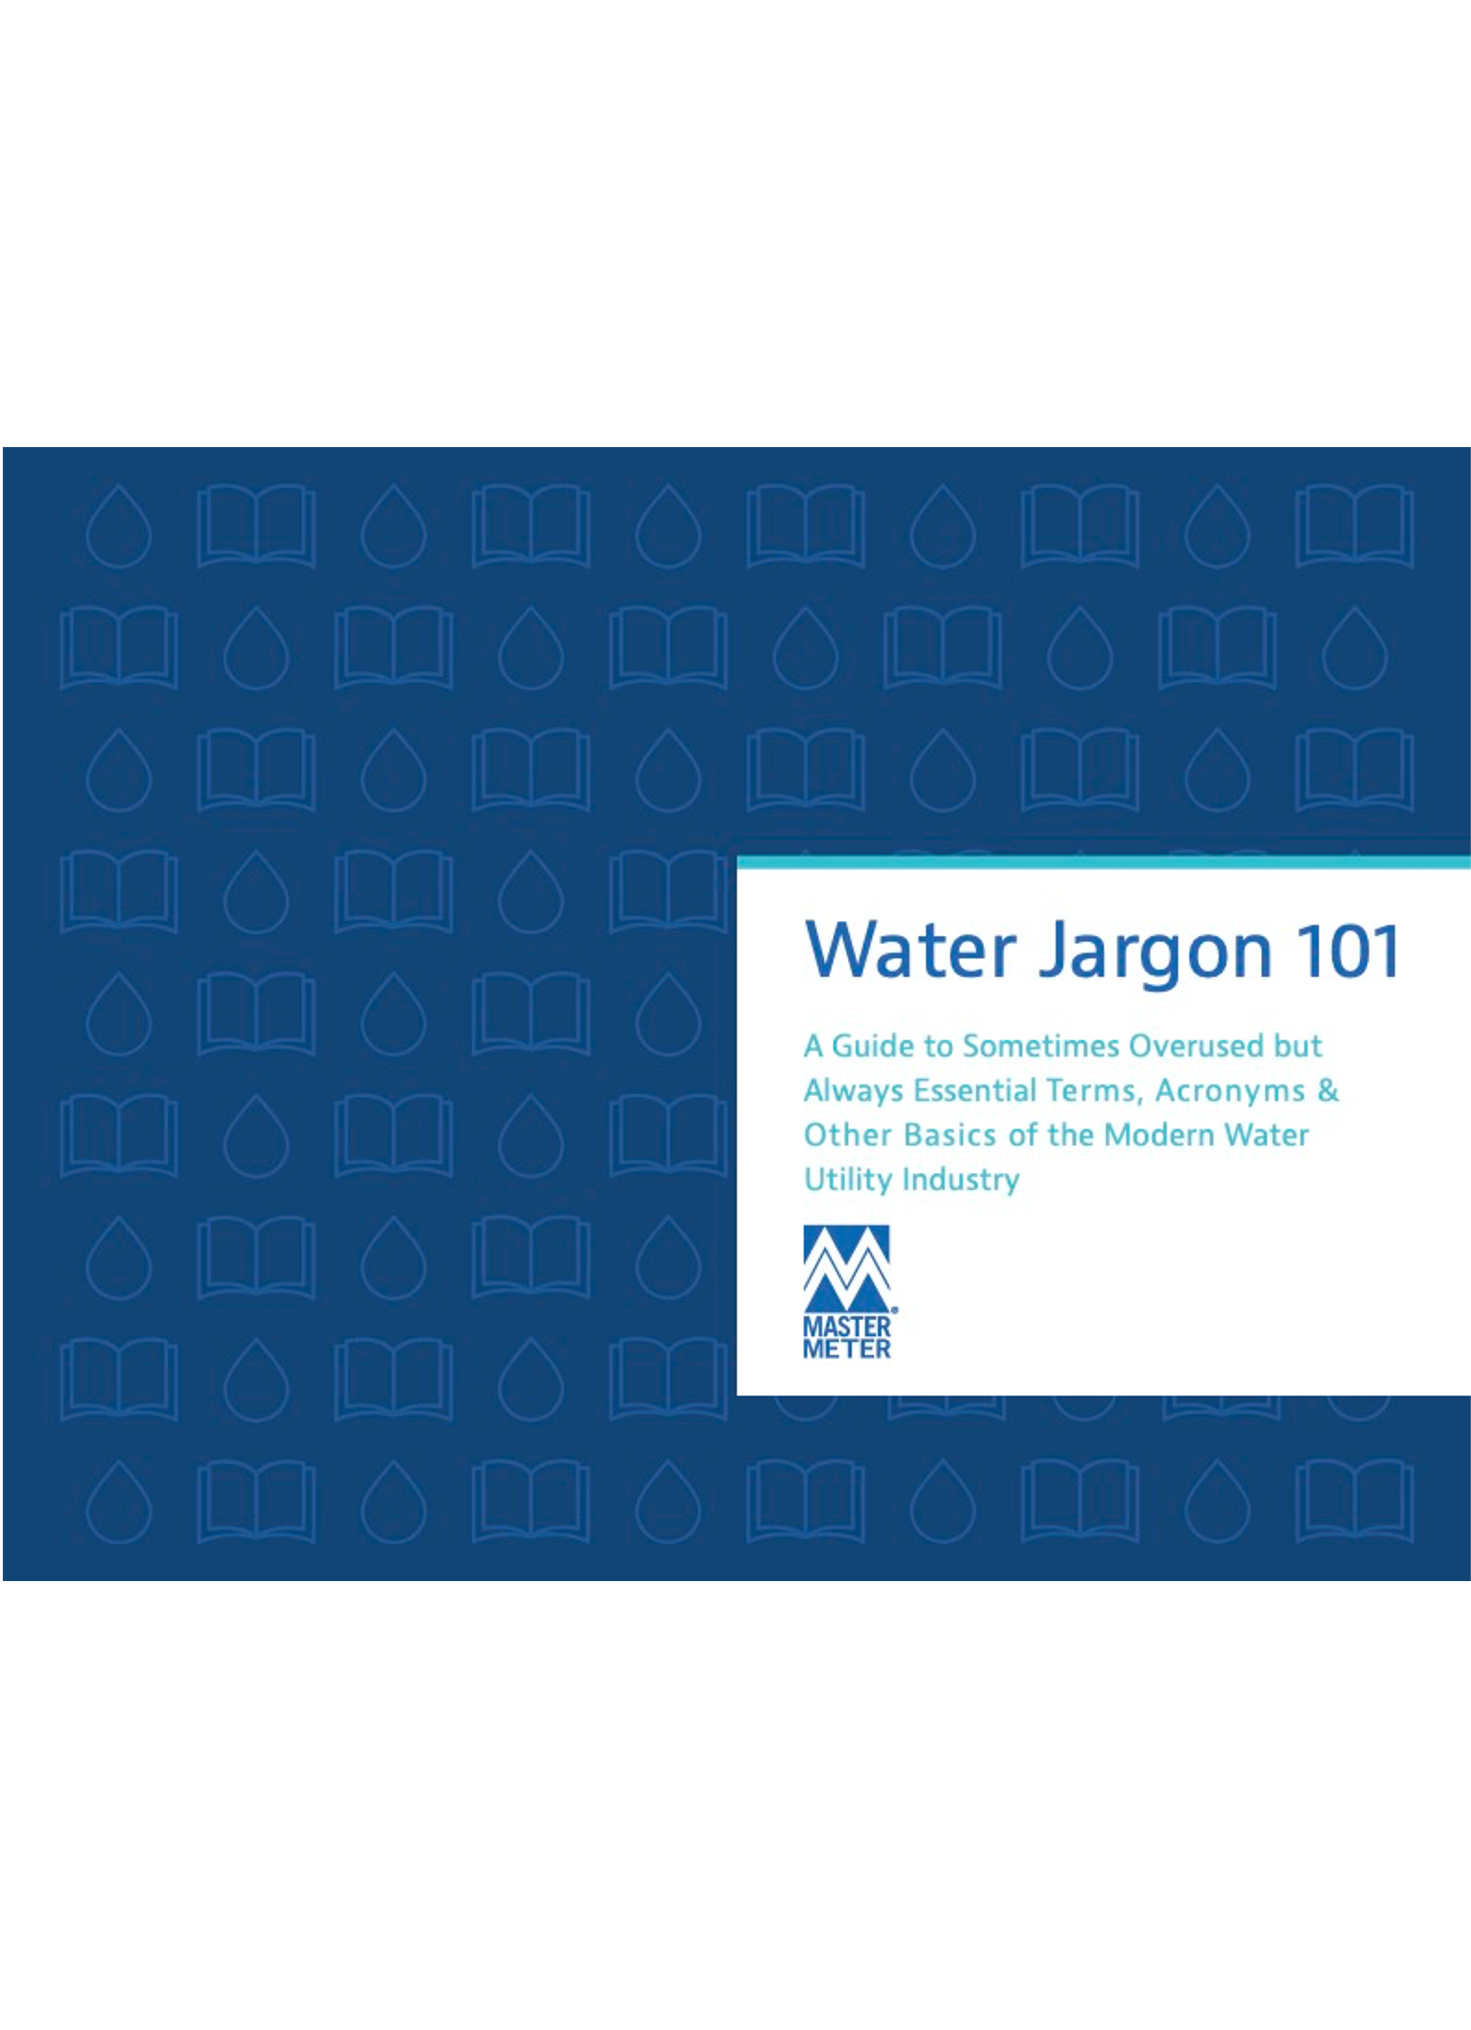 The Essential Guide to Smart Water Jargon